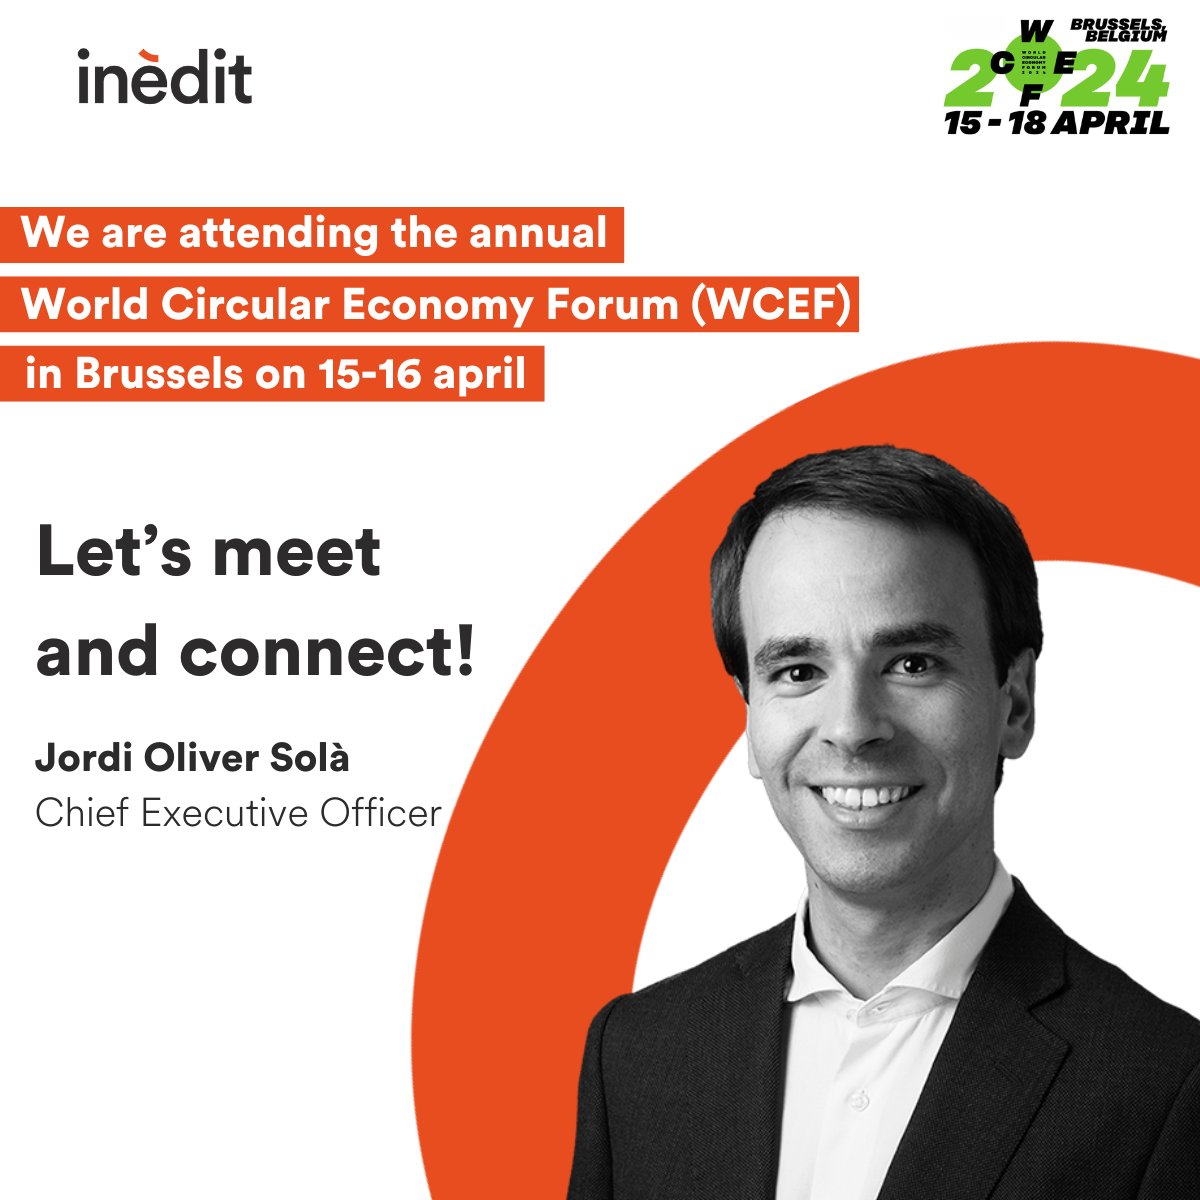 In a week, our Chief Executive Officer, @JordiOliverSola, will be in Brussels to attend the @WCEF2024, the world's leading event for circular economy thinkers, doers, and leaders. Will you be there? Get in touch and let’s meet onsite! #circulareconomy #WCEF2024